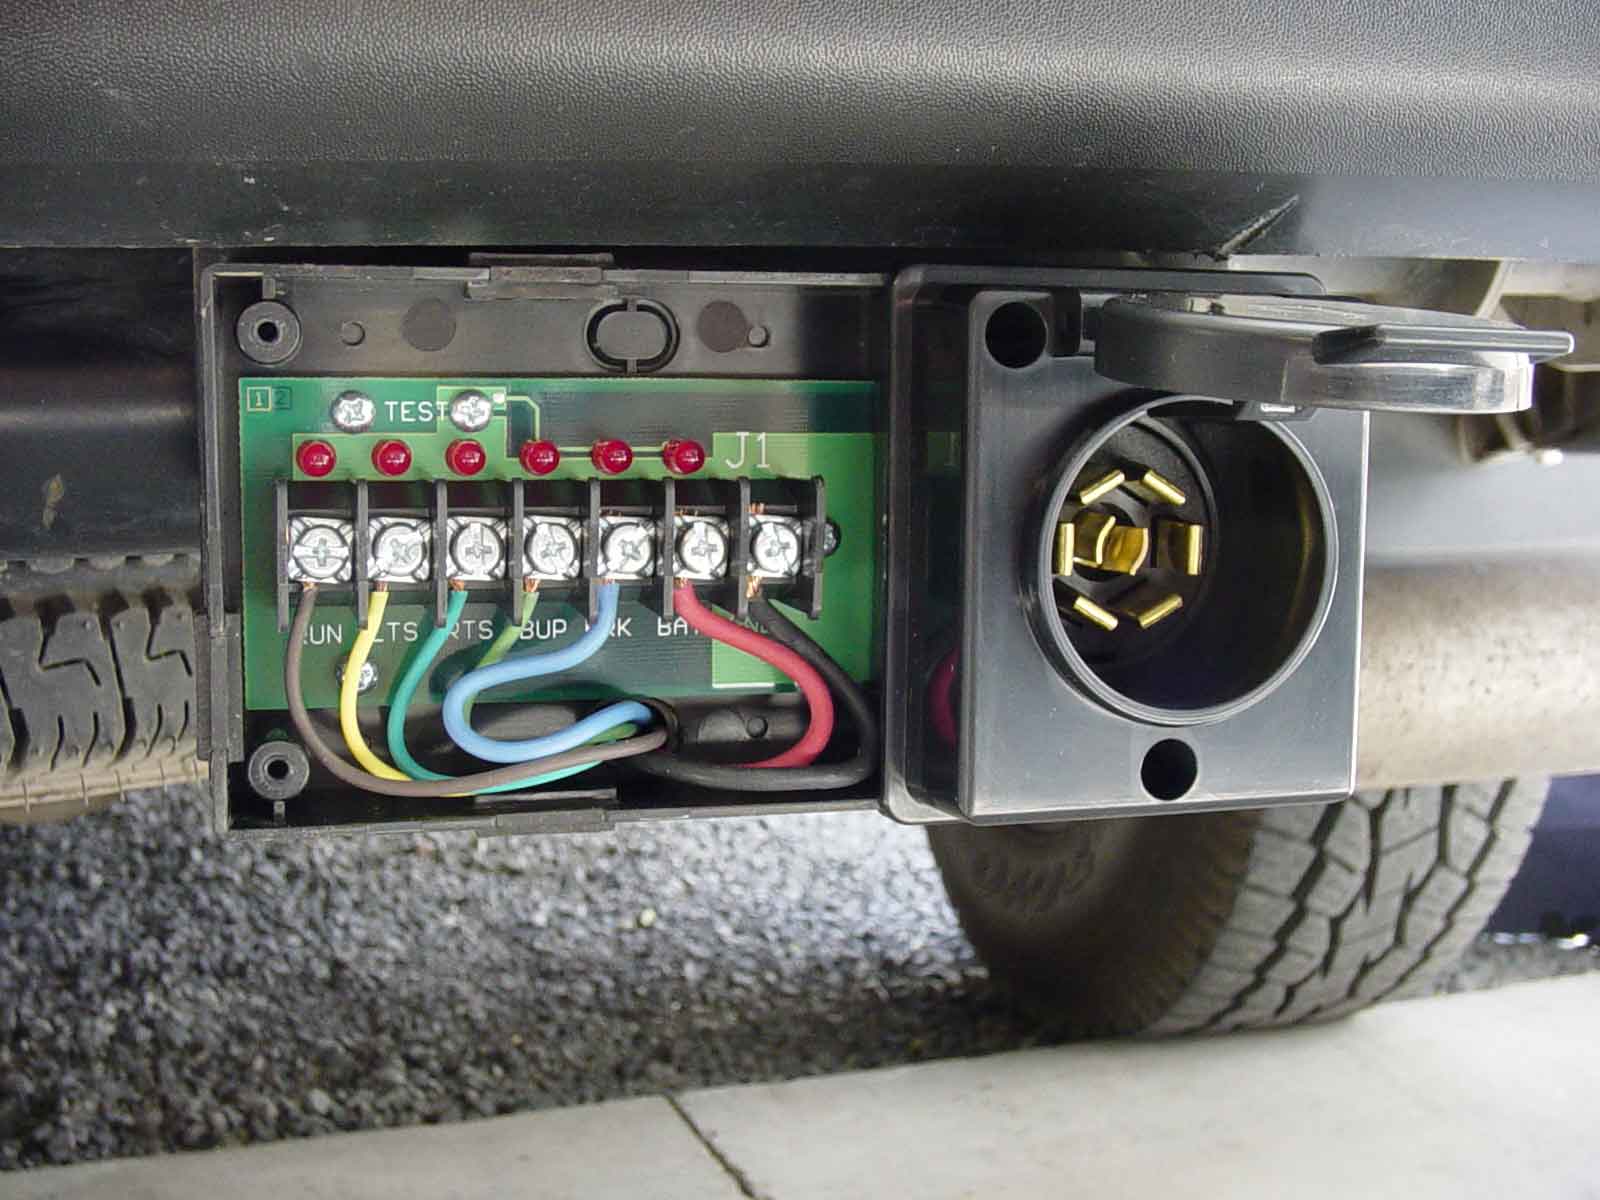 Mounted Pro Plug trailer connector with the cover removed. Shows wiring of this Surface mountable 7 pin trailer plug connector.